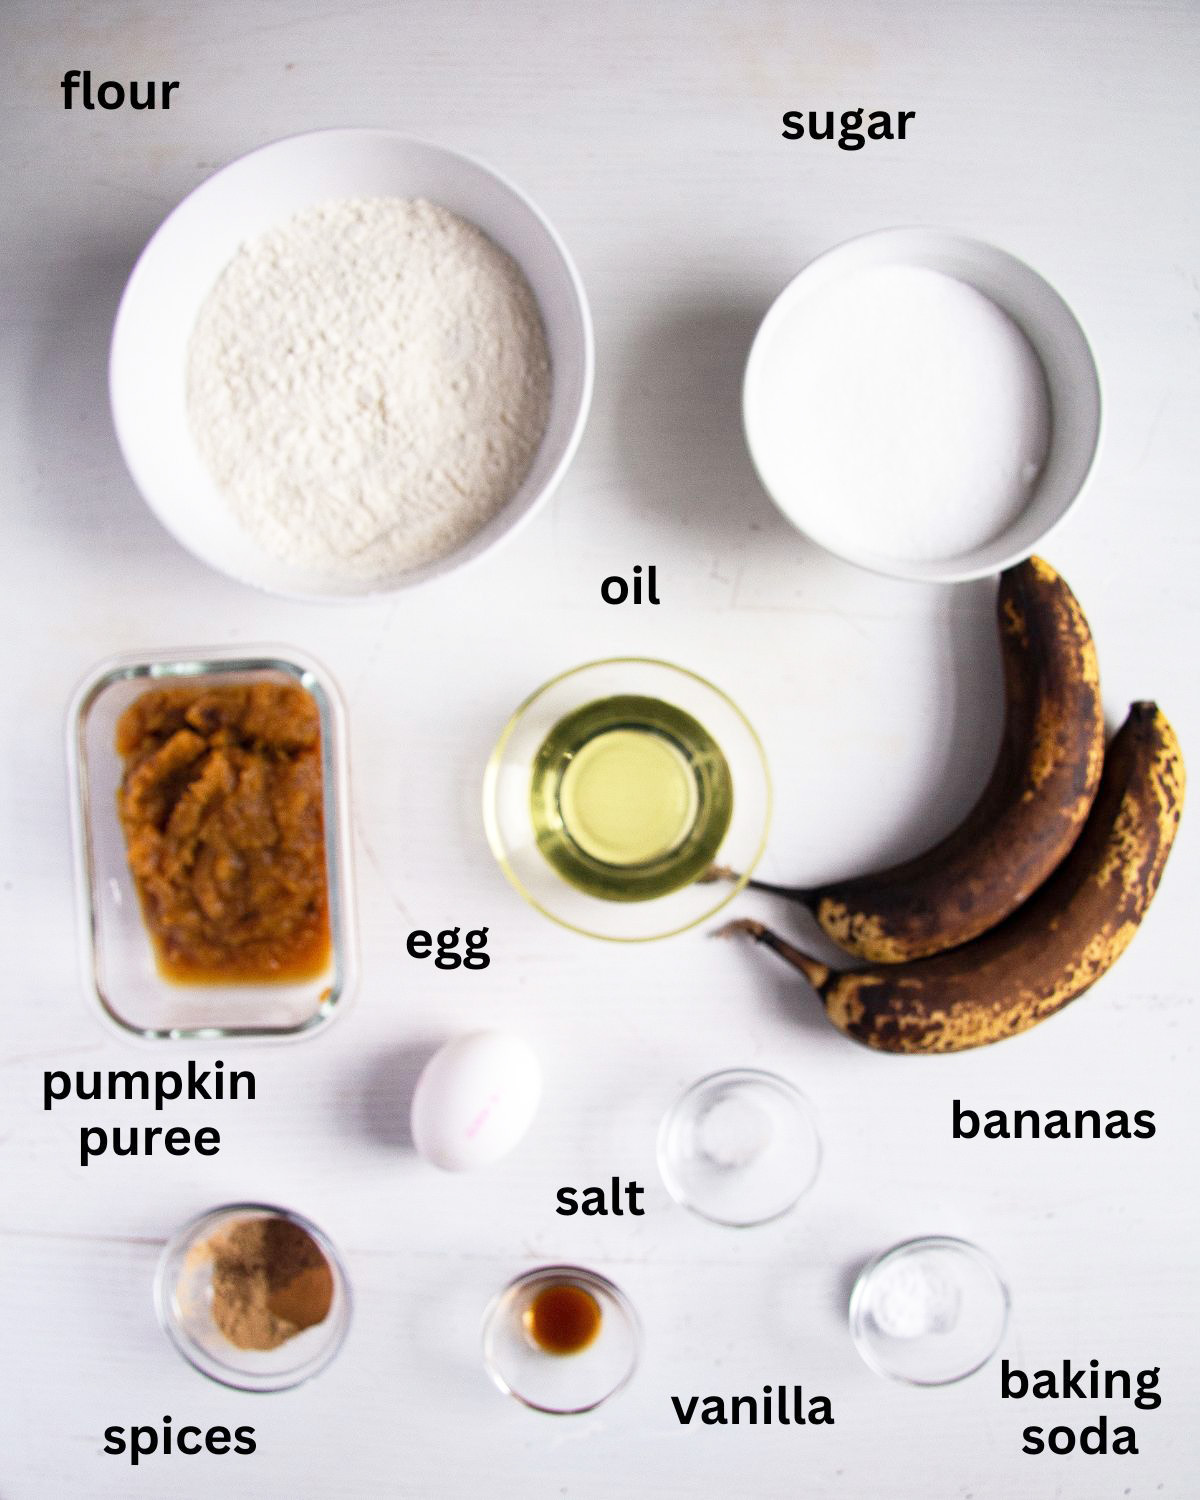 listed ingredietnts for muffins with bananas, pumpkin puree and spices.